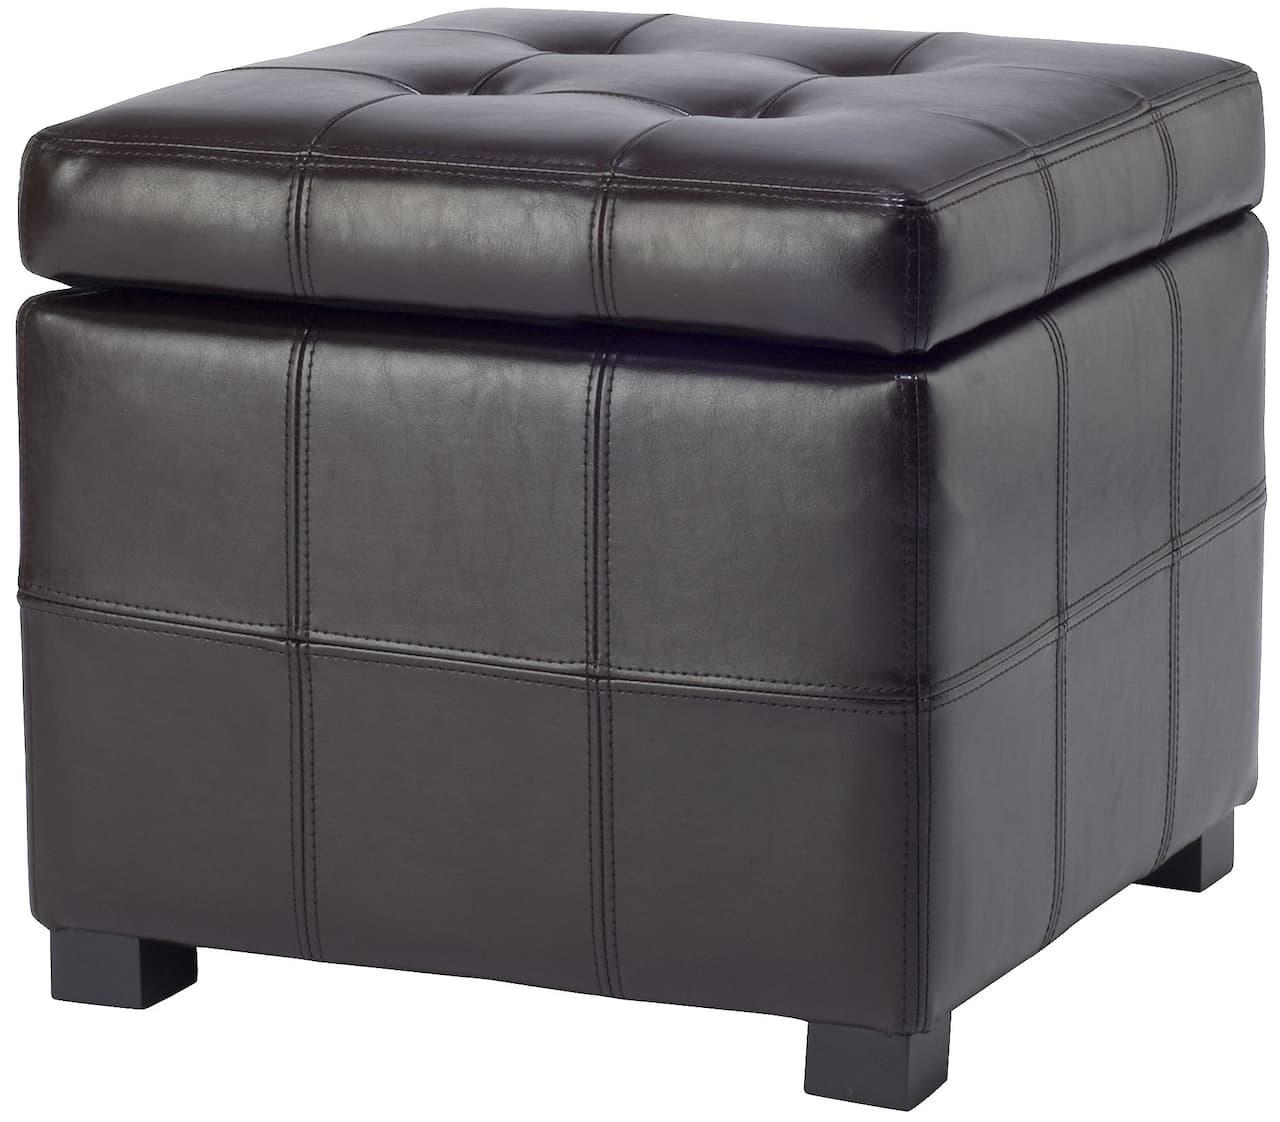 Maiden Square Tufted Ottoman in Brown